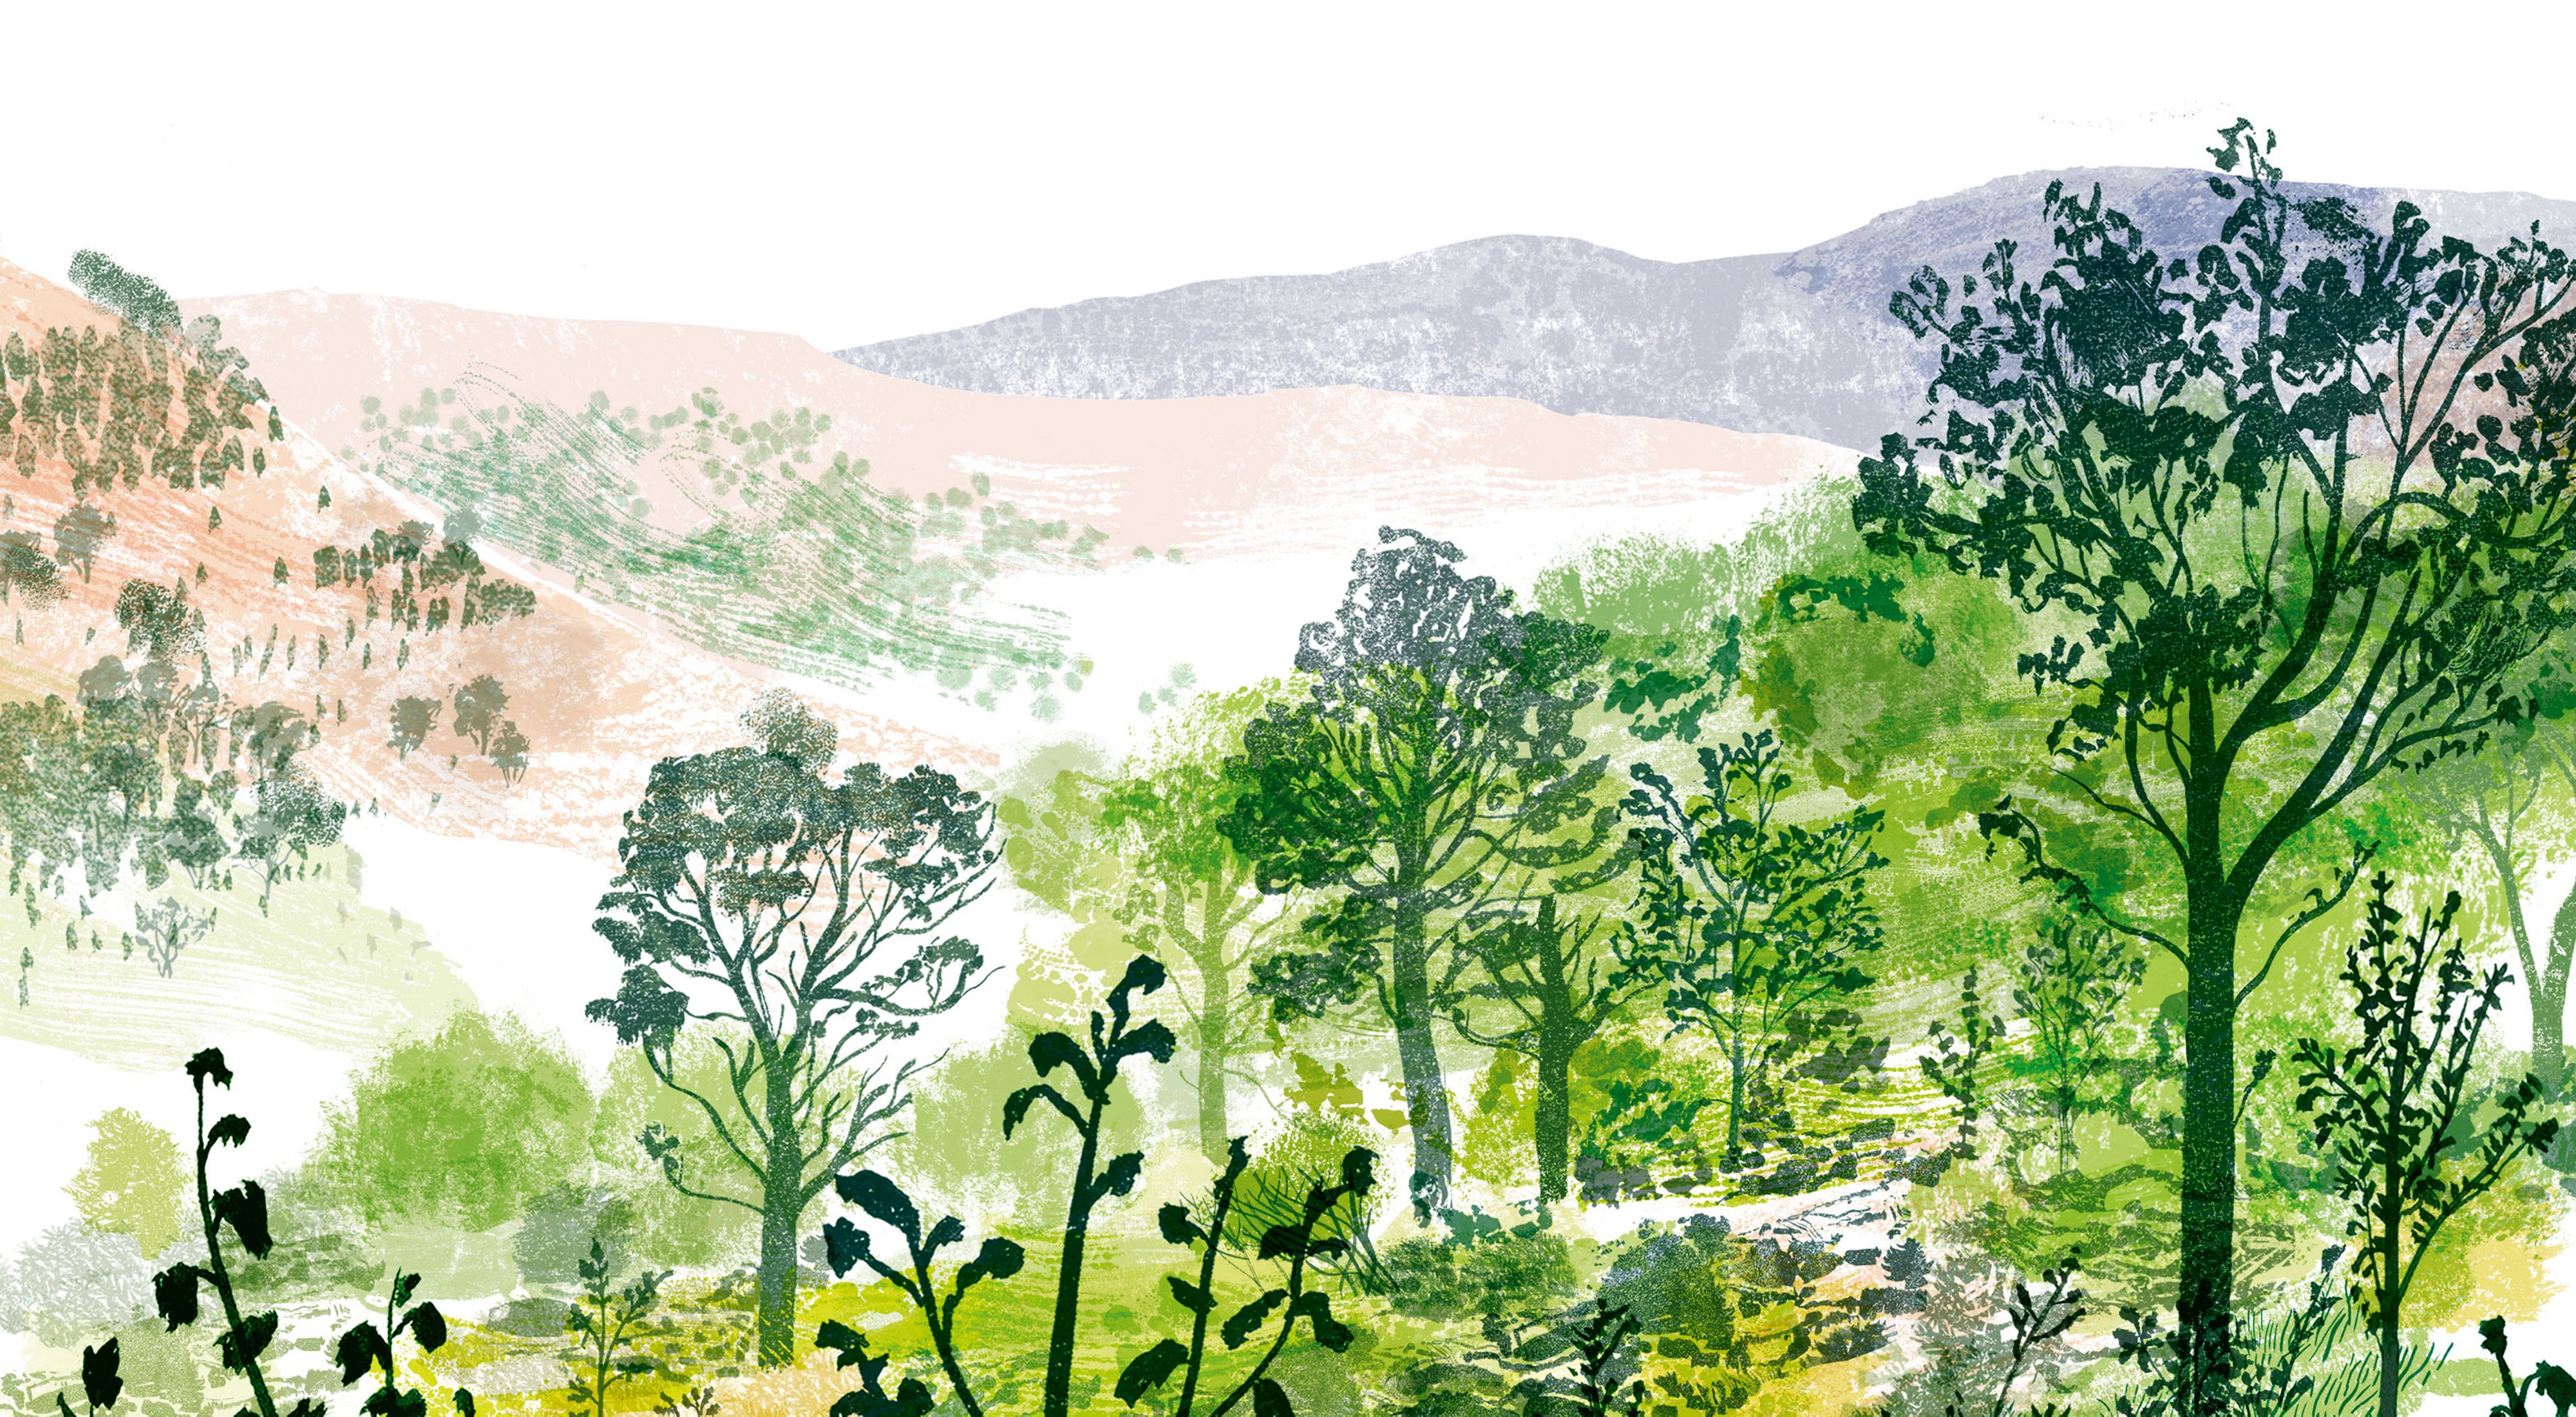 a collage-like illustration of a landscape with logs shrubs in the foreground and forests in the background